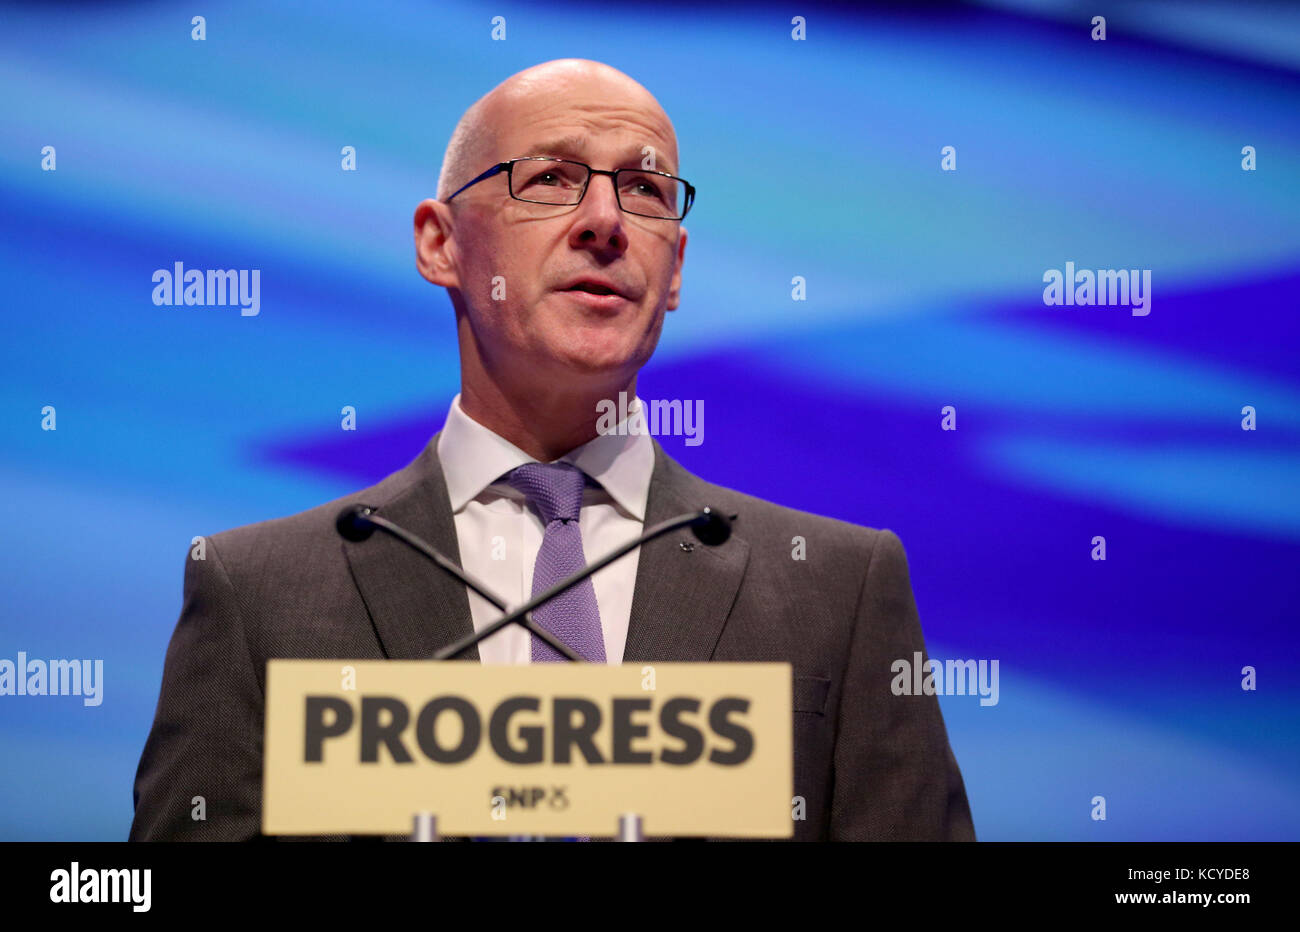 Deputy First Minister of Scotland John Swinney delivers the opening address to delegates at the Scottish National Party (SNP) conference at the SEC Centre in Glasgow. Stock Photo